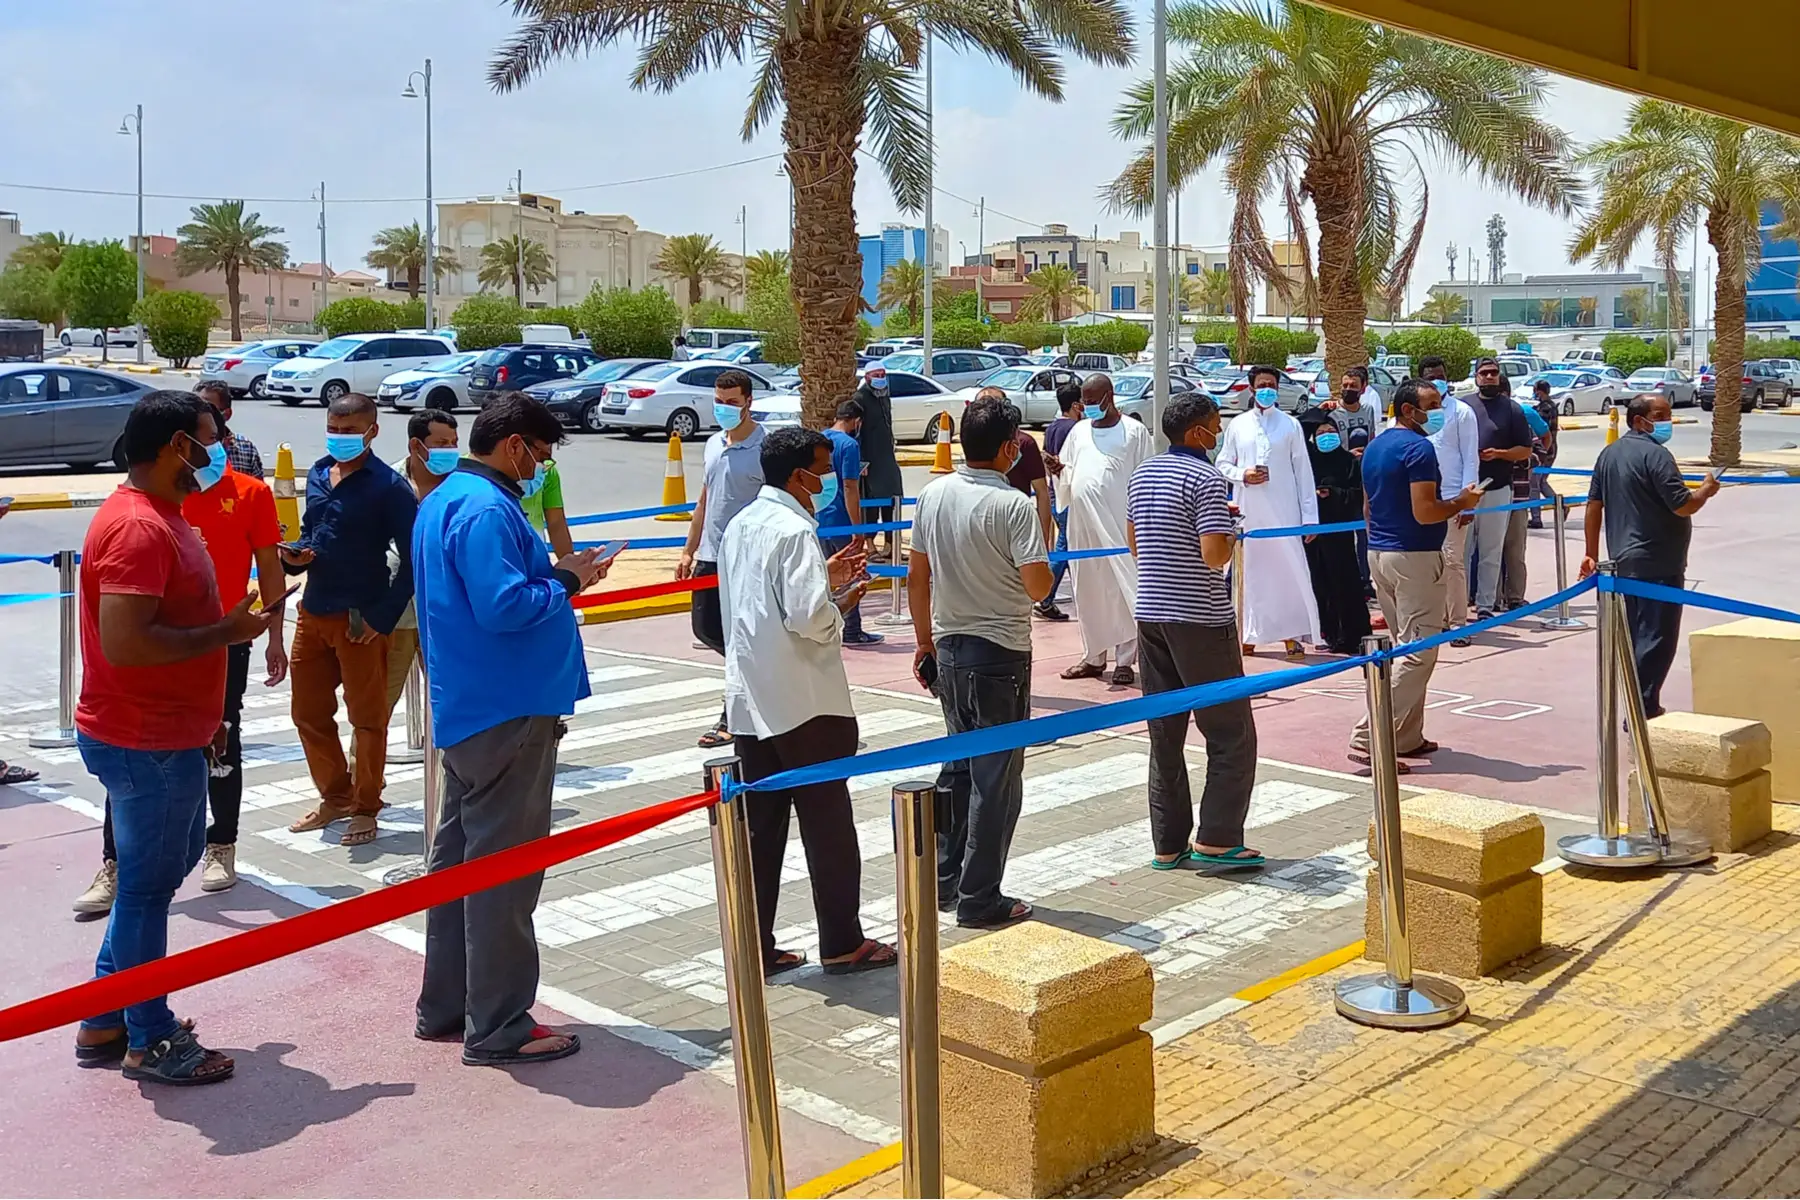 a group of people waiting for the COVID-19 vaccination outside the Expo Center in Riyadh, Saudi Arabia